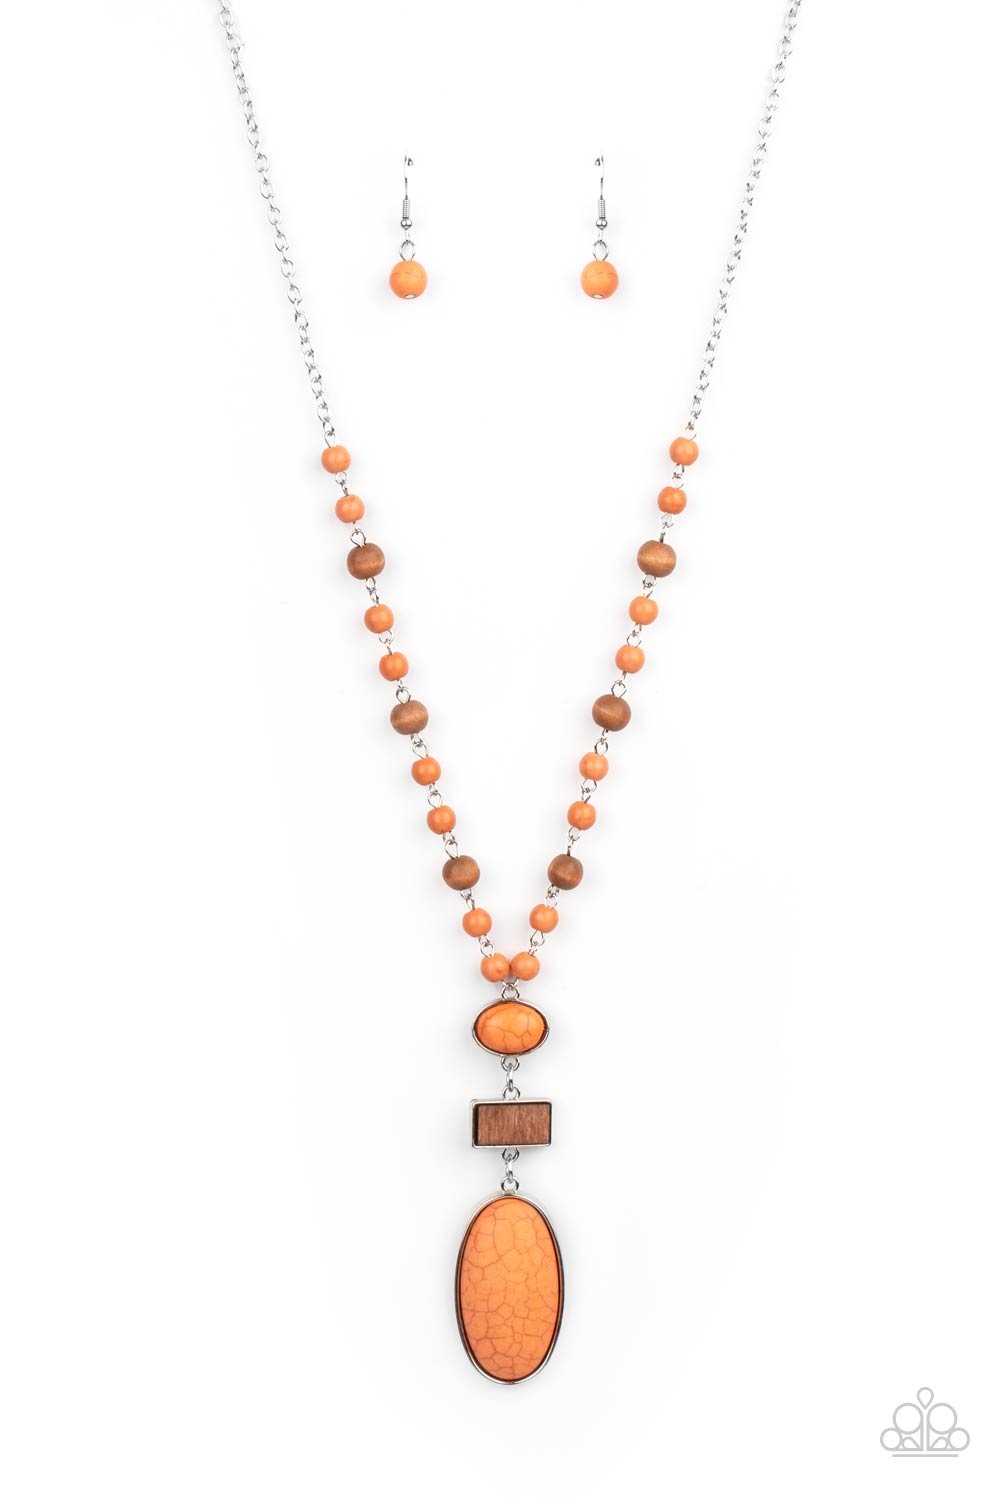 Naturally Essential - Orange Stone Necklaces a dainty collection of Rust stone and rustic wooden beads connects into an earthy chain across the chest. Featuring sleek silver frames, oval stones and a rectangular wood frame connect into a dramatically stacked seasonal pendant at the bottom of the colorful display. Features an adjustable clasp closure.  Sold as one individual necklace. Includes one pair of matching earrings.  Paparazzi Jewelry is lead and nickel free so it's perfect for sensitive skin too!